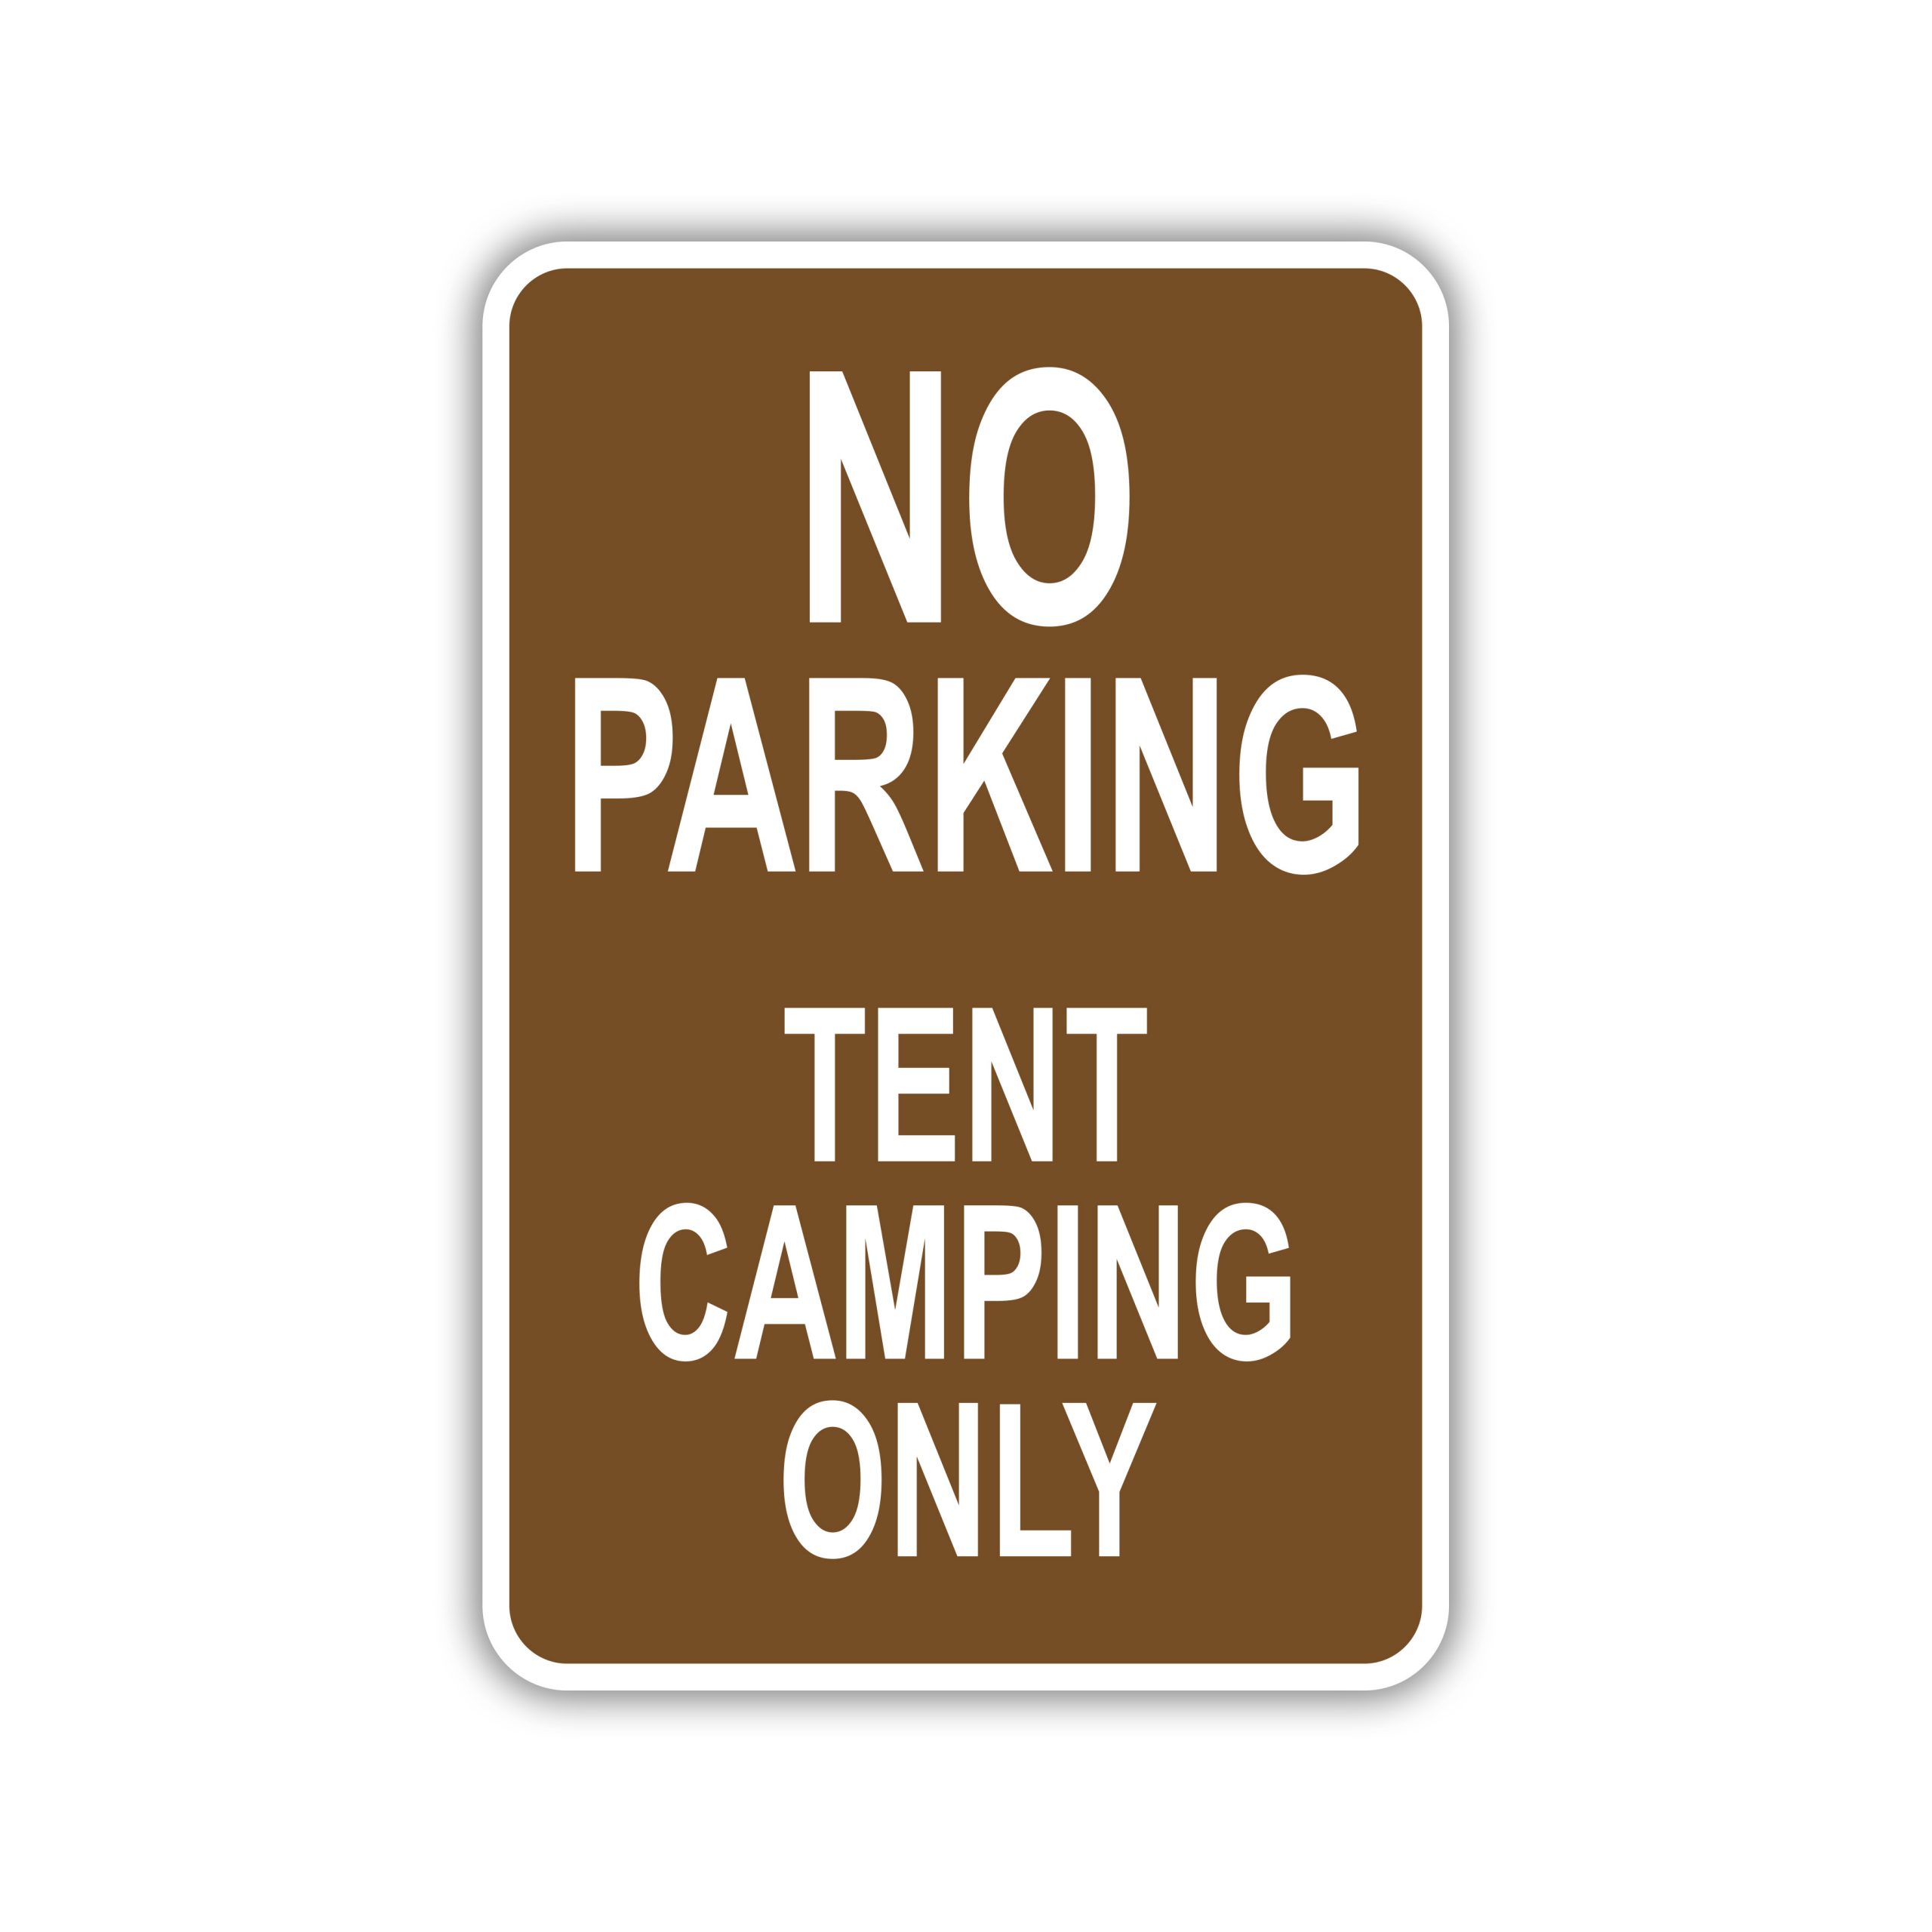 NO PARKING TENT CAMPING ONLY - American Sign Company